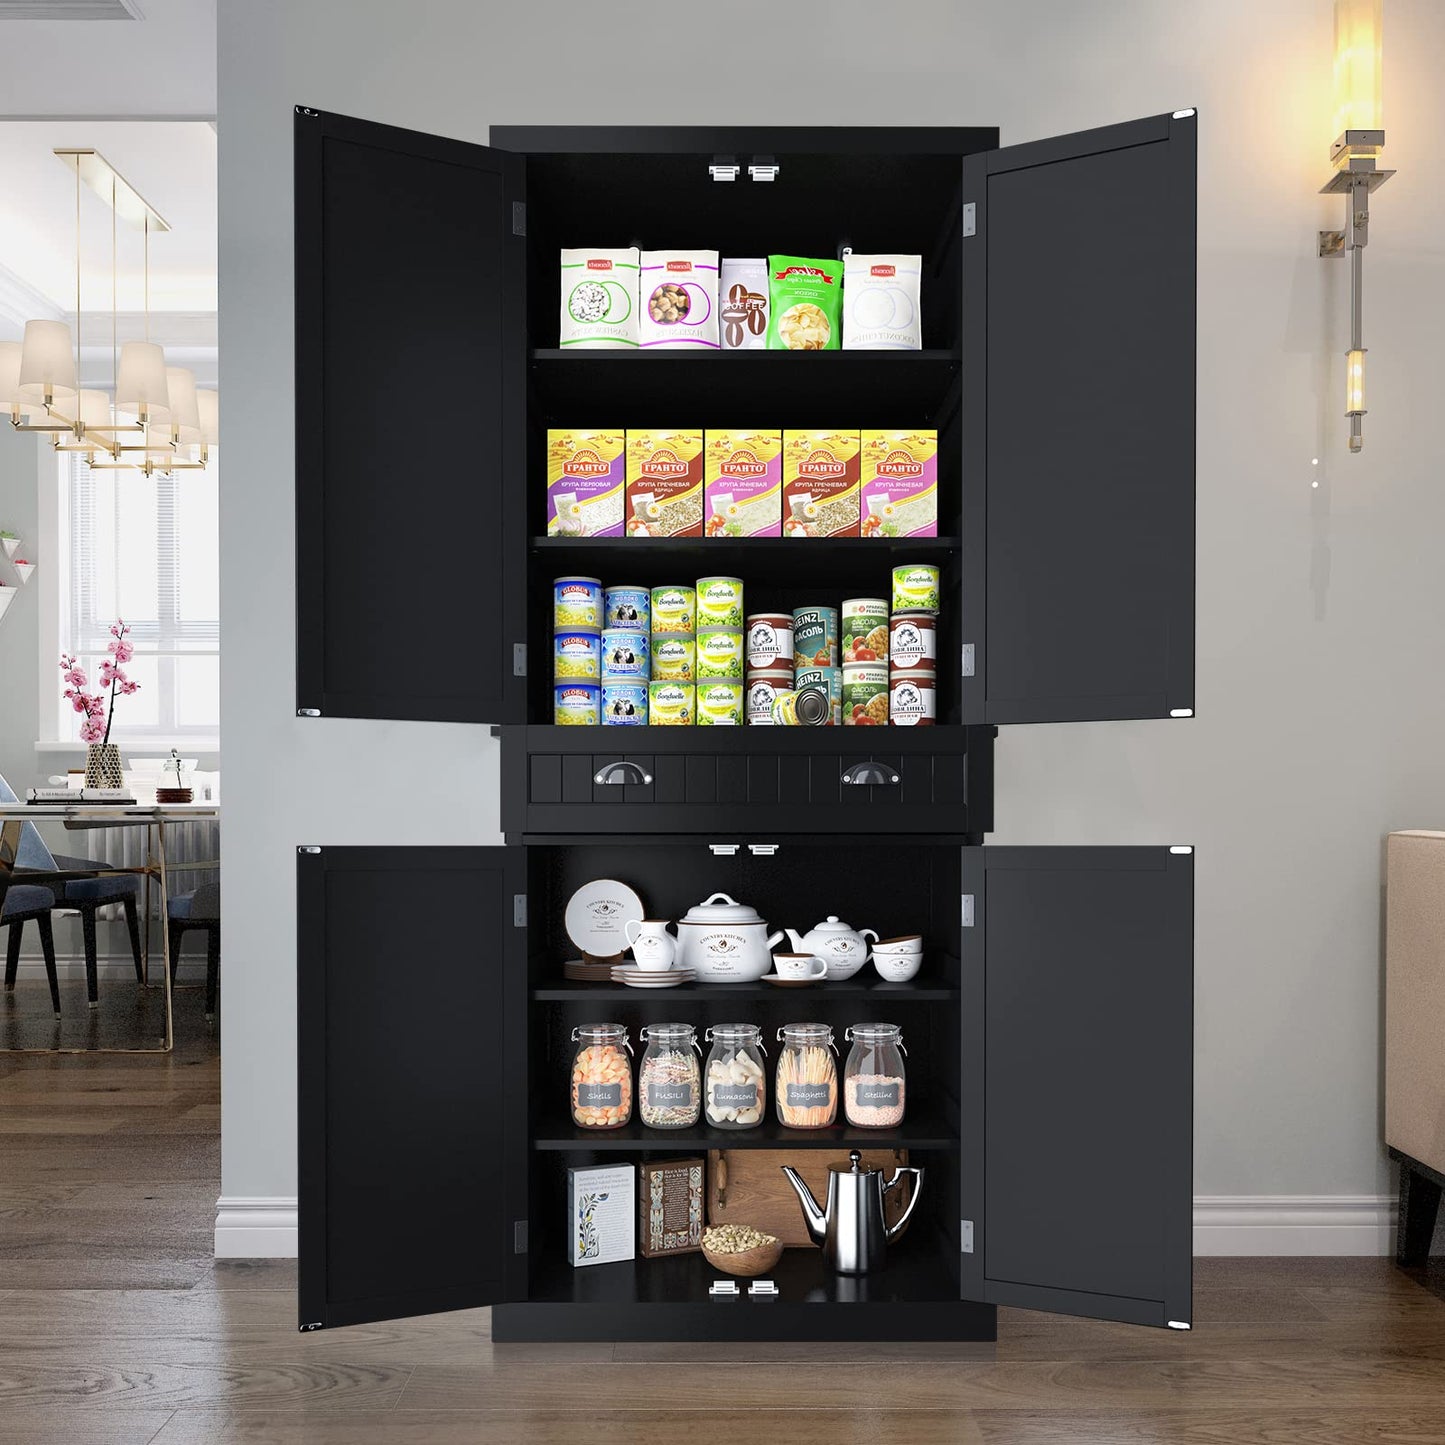 ARTPOWER Kitchen Pantry Storage Cabinet with Drawer and Adjustable Shelves, Pantry Cabinet for Kitchen, Bathroom or Hallway, Black